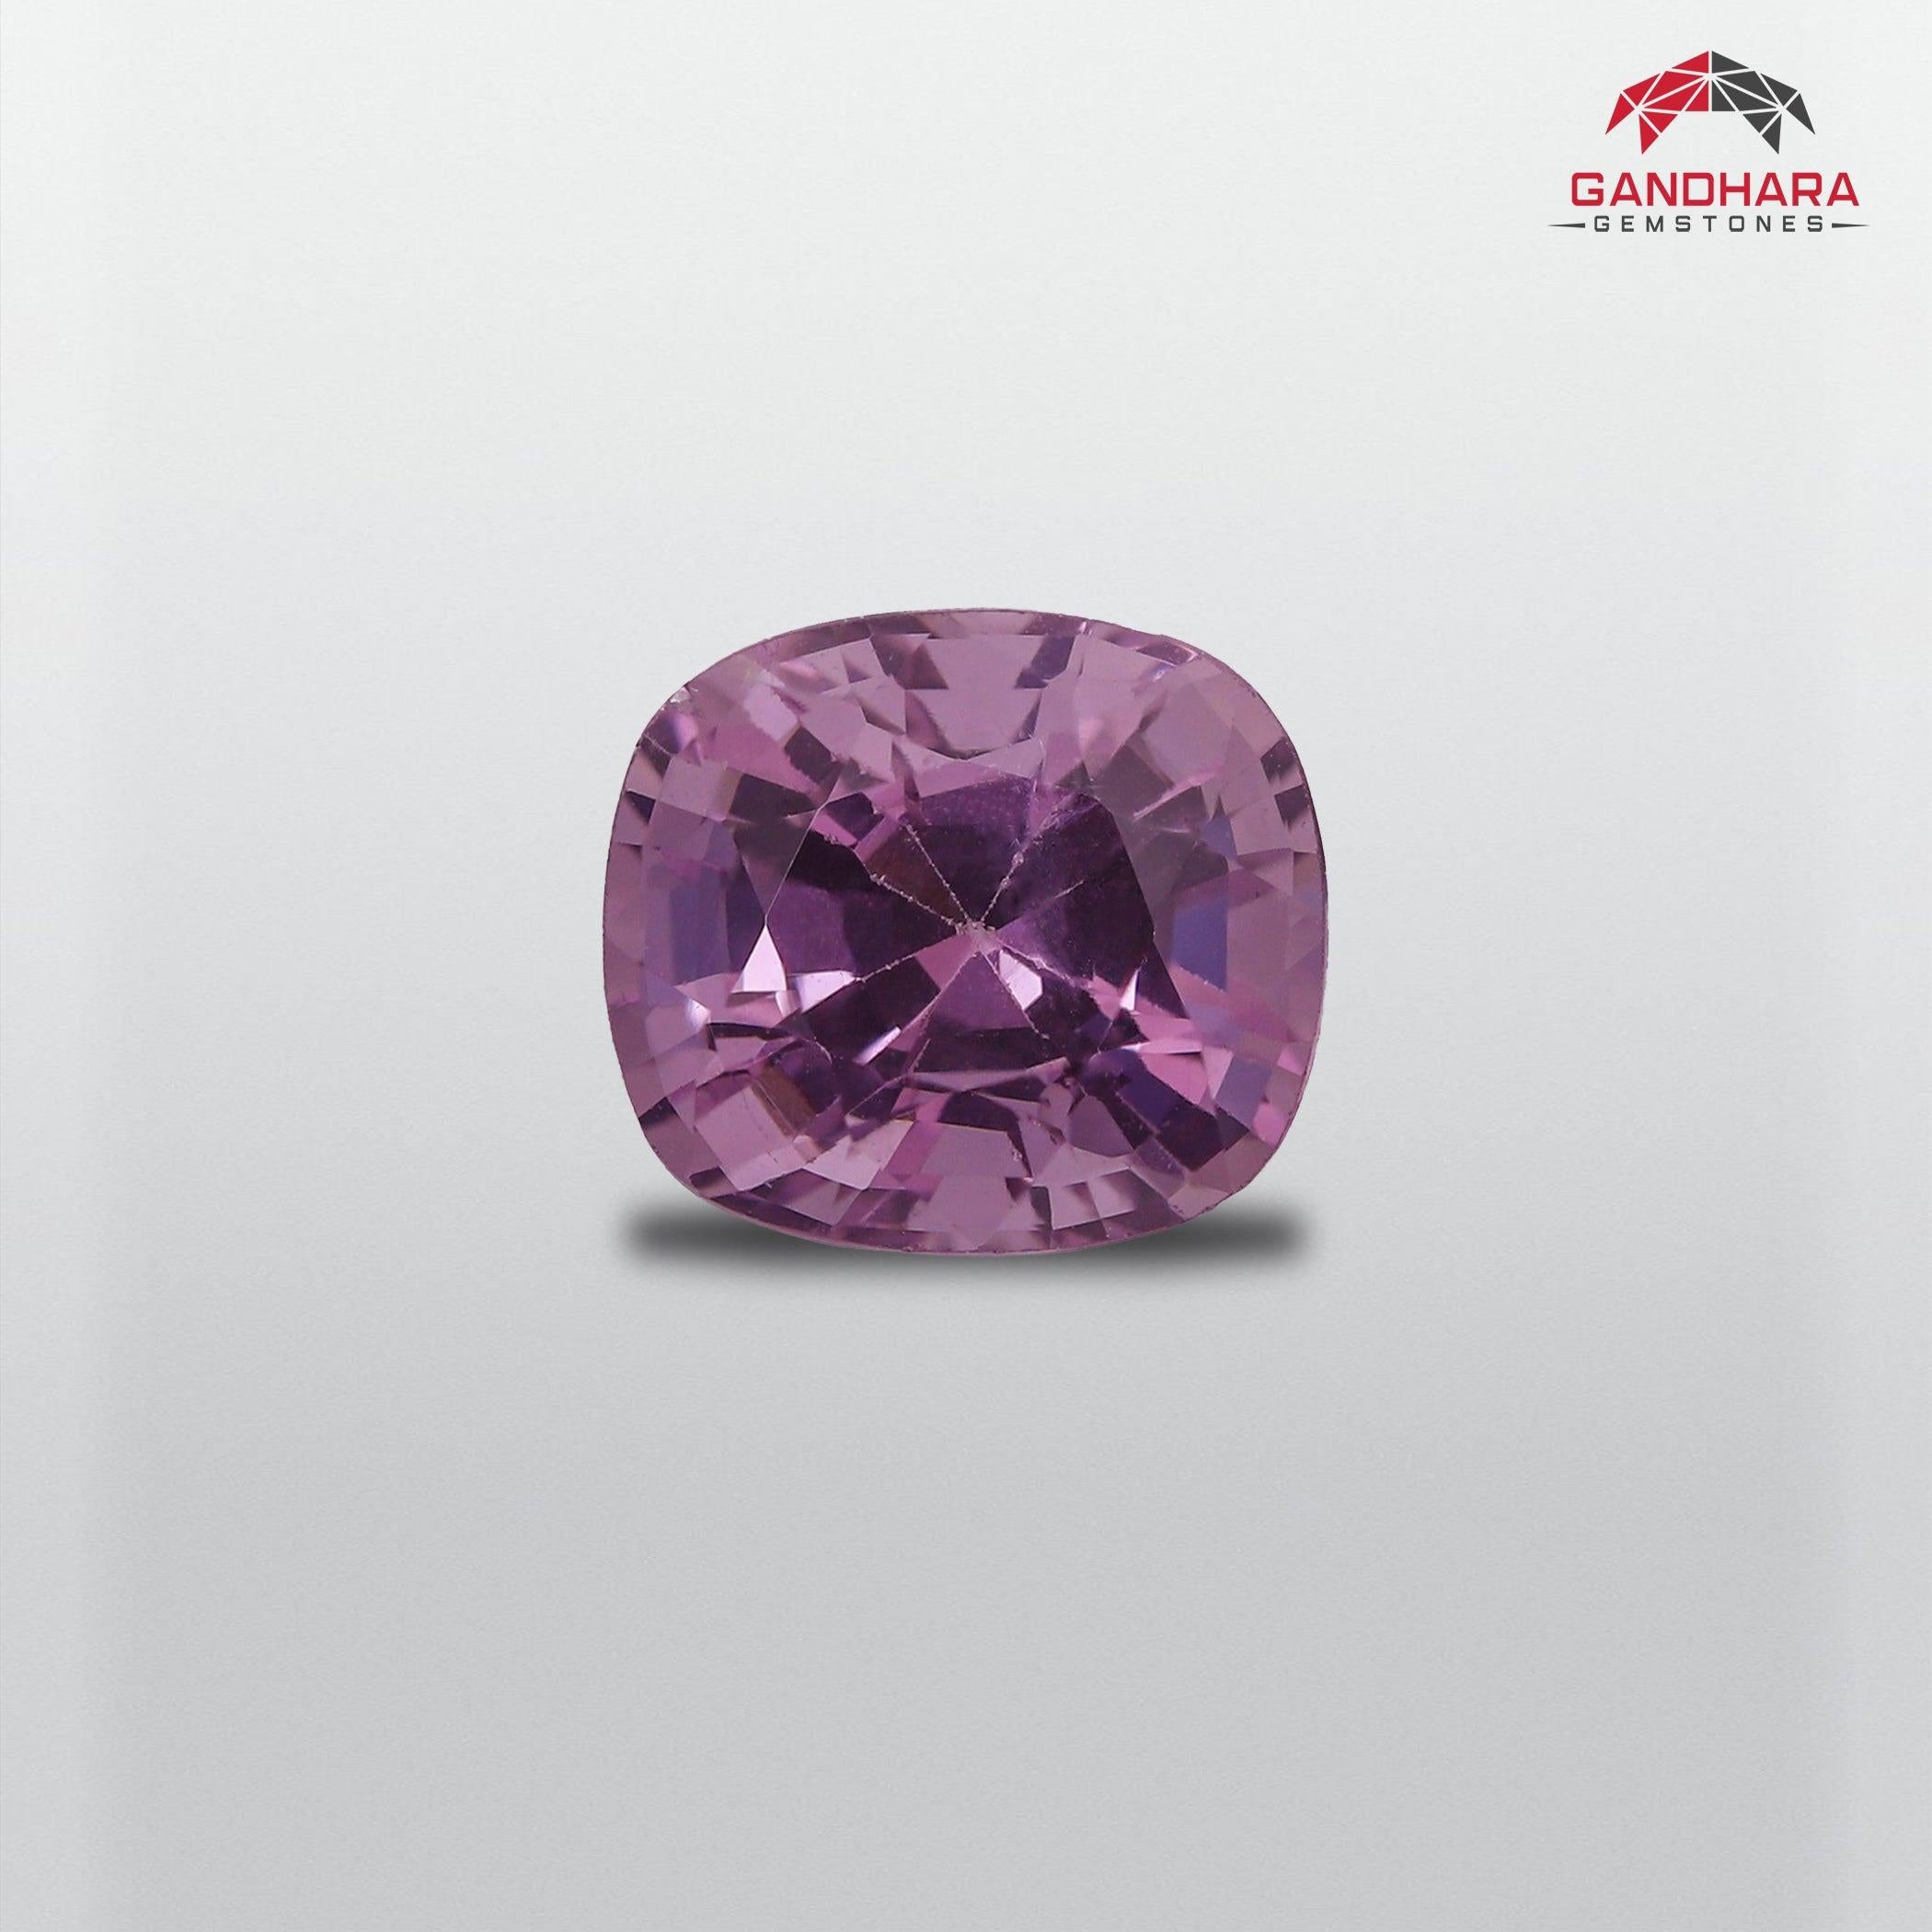 Purplish Pink Spinel Gemstone of 1.55 carats from Burma has a wonderful cut in a Cushion shape, incredible Purplish Pink color. Great brilliance. This gem is Eye Clean Clarity.

Product Information:
GEMSTONE TYPE:	Purplish Pink Spinel